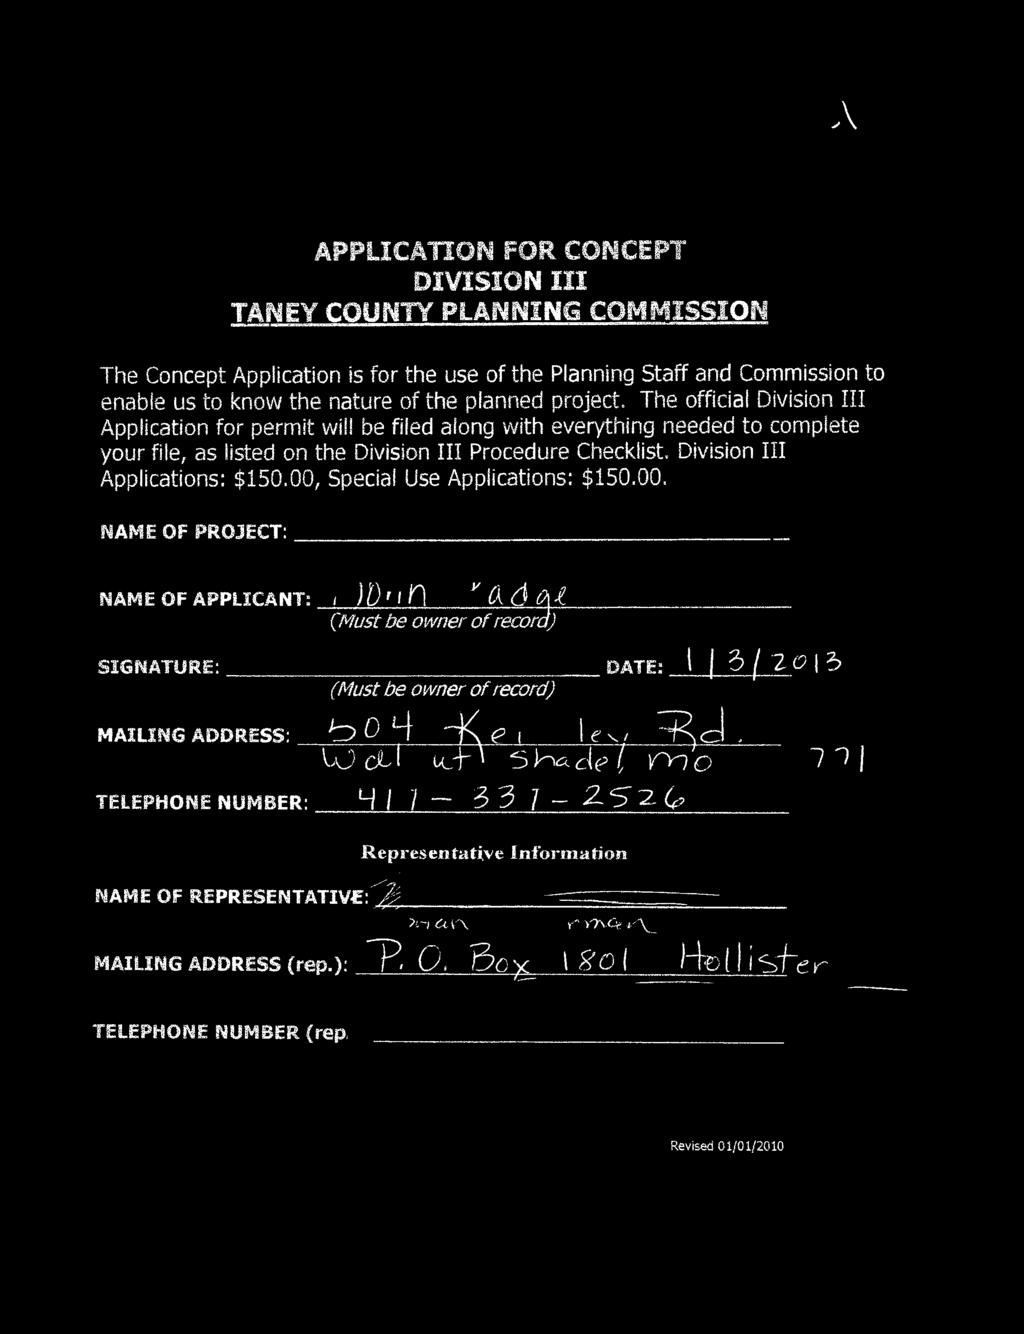 A APPLICATION FOR CONCEPT DIVISION III TANEY COUNTY PLANNING COMMISSION The Concept Application is for the use of the Planning Staff and Commission to enabie us to know the nature of the planned